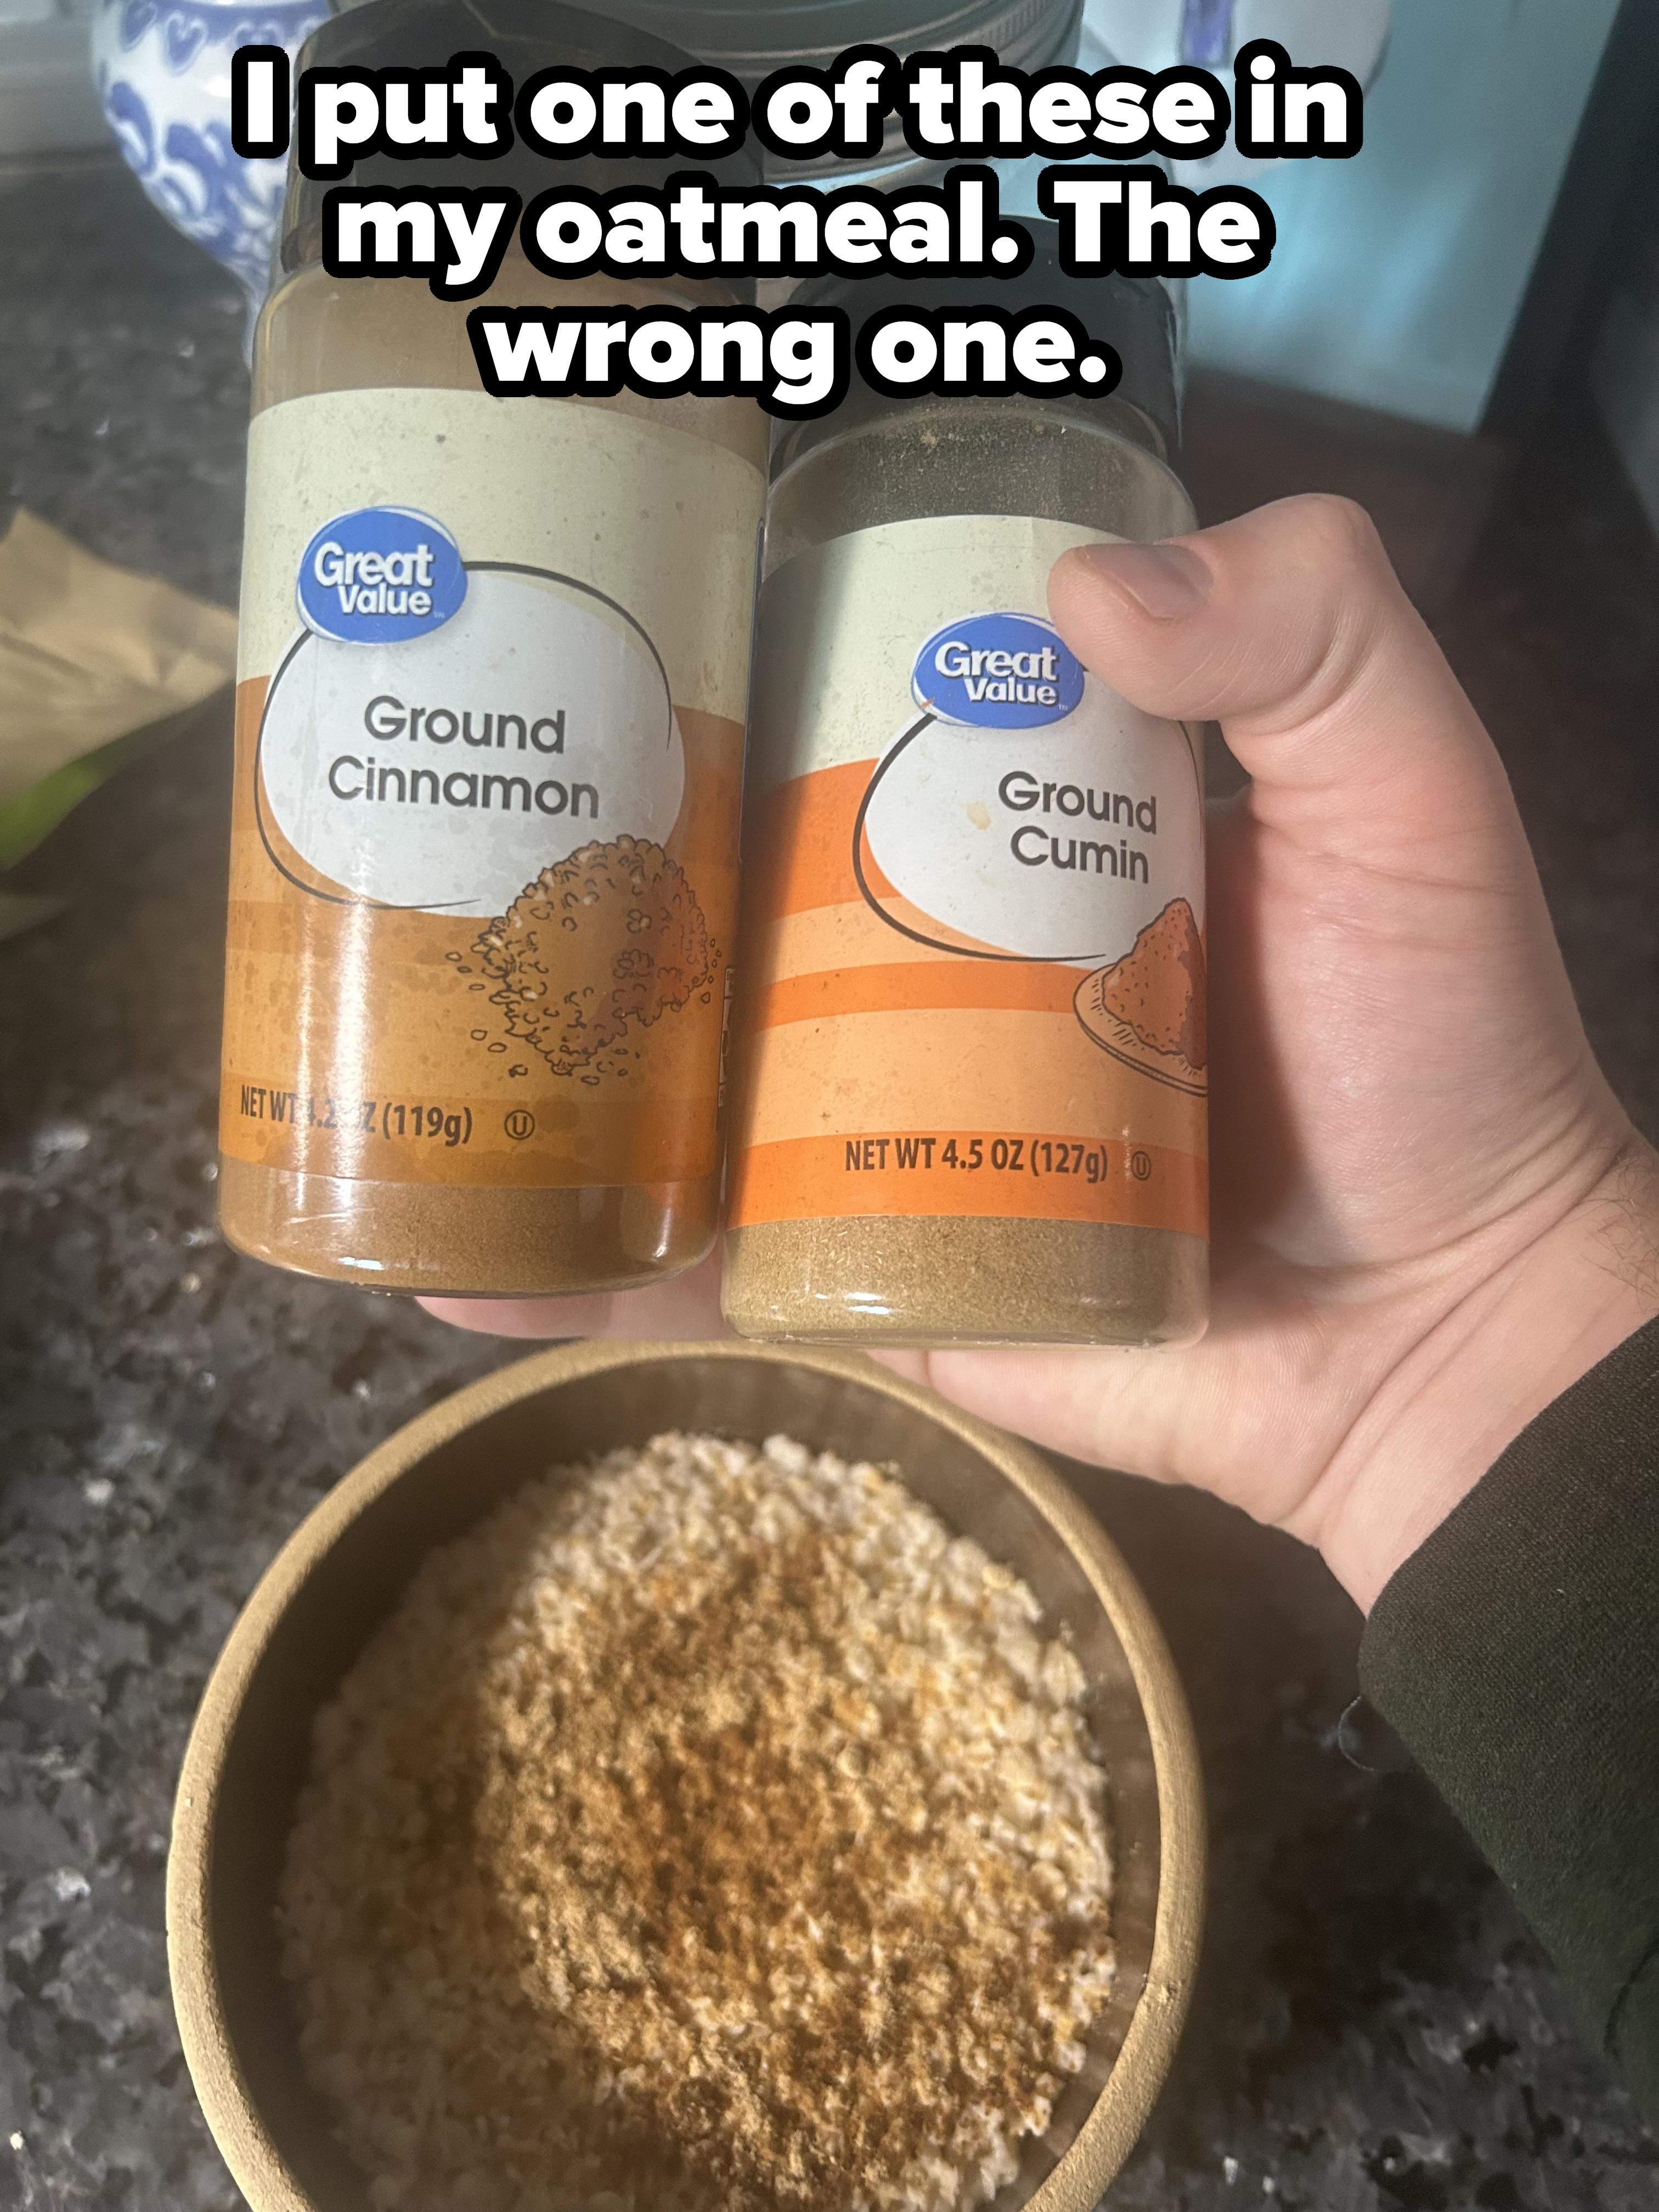 &quot;I put the wrong one of these in my oatmeal,&quot; showing a jar of ground cinnamon and one of ground cumin